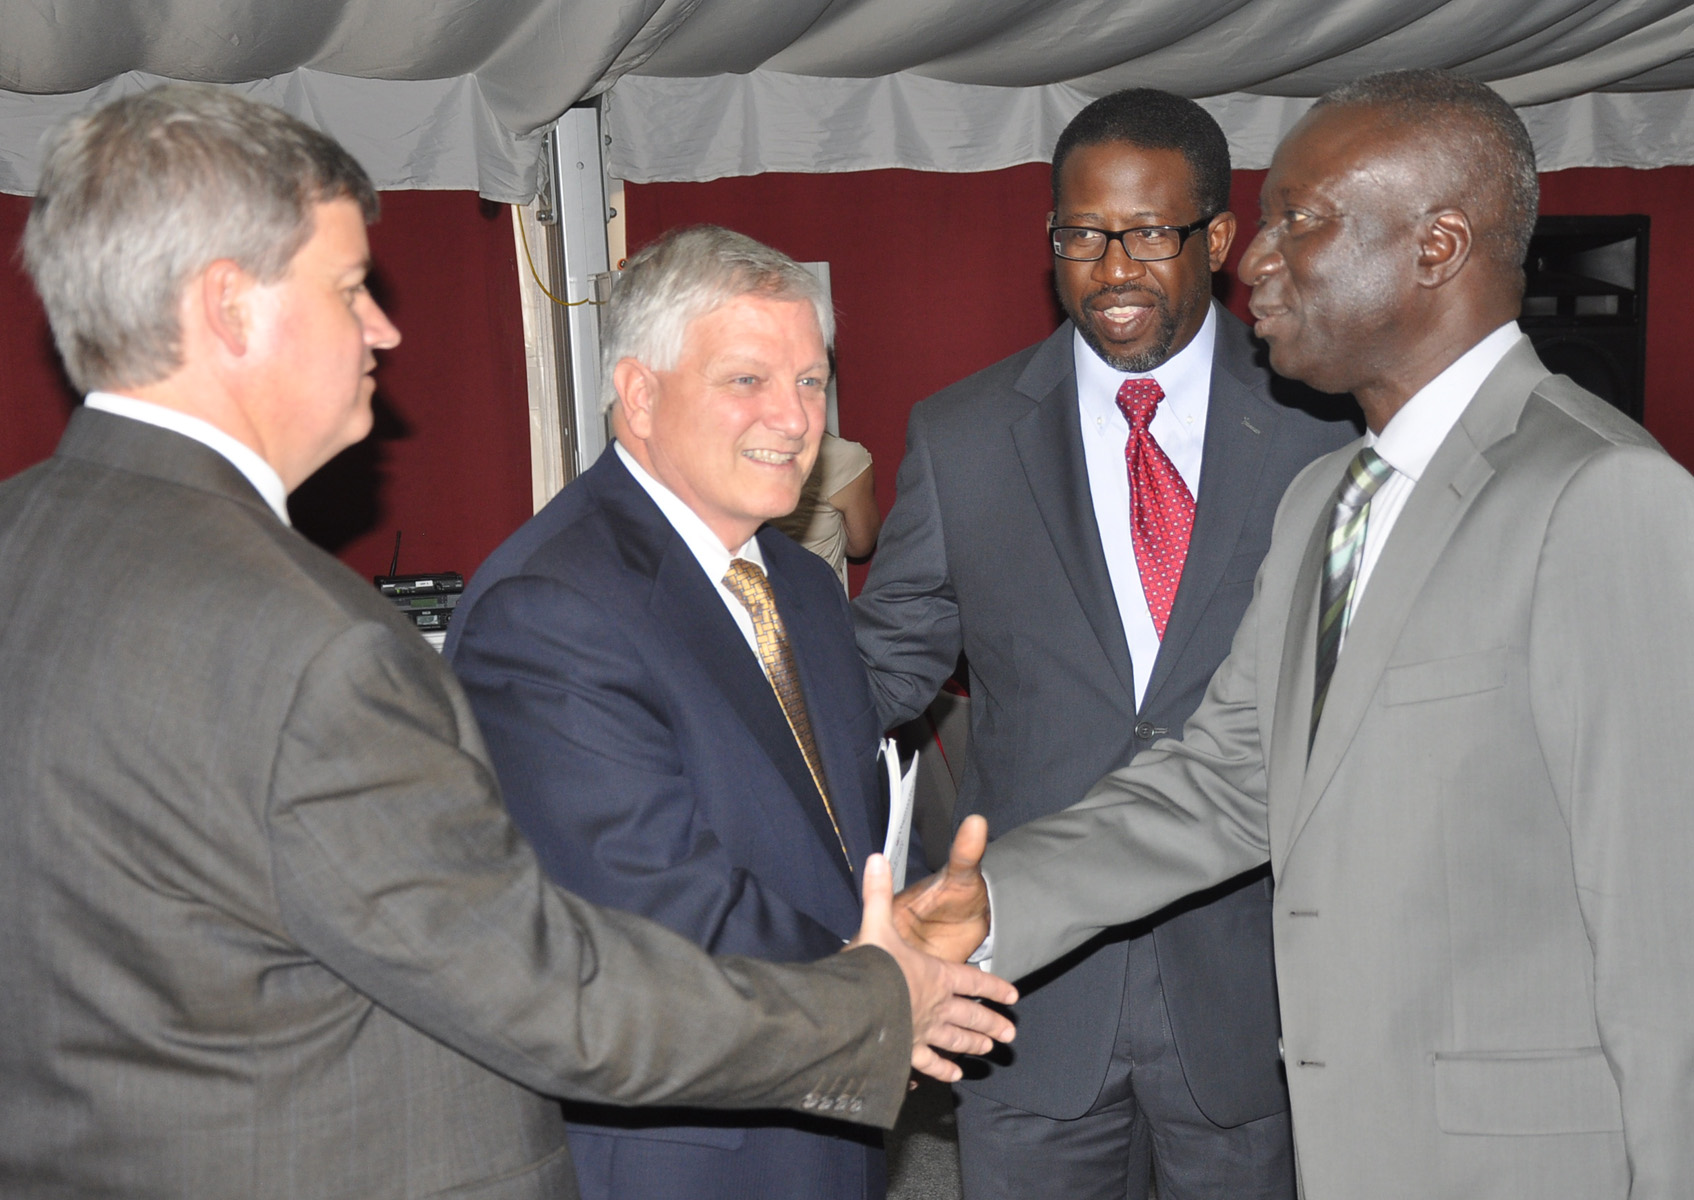 Virginia Tech official shakes hands with manager general of higher education in Senegal